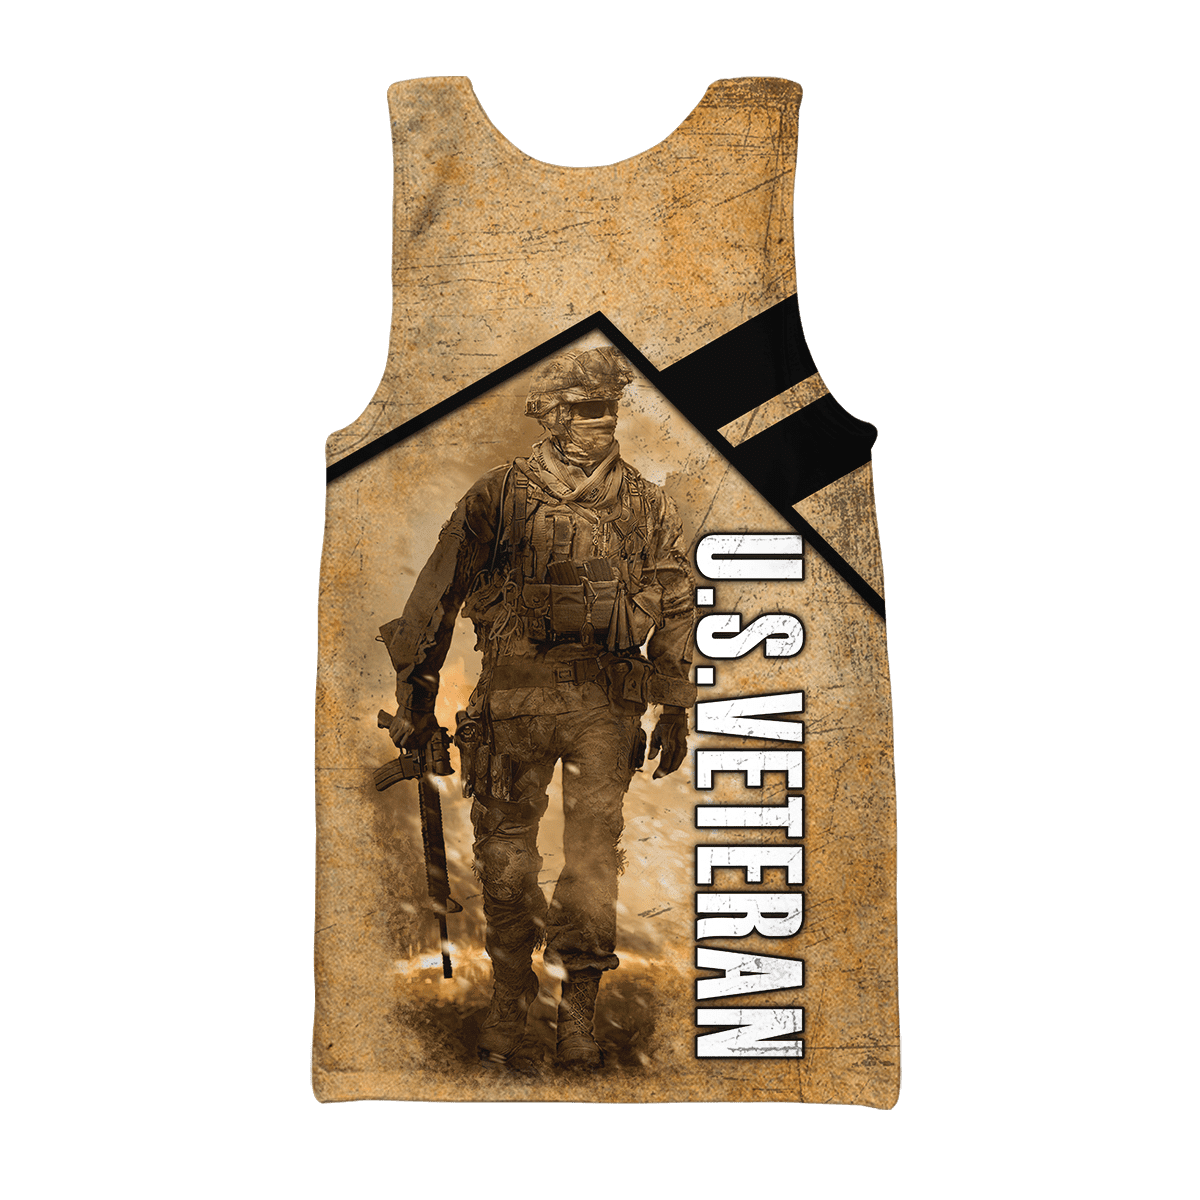 US Veteran - All Gave Some Some Gave All Unisex Shirts